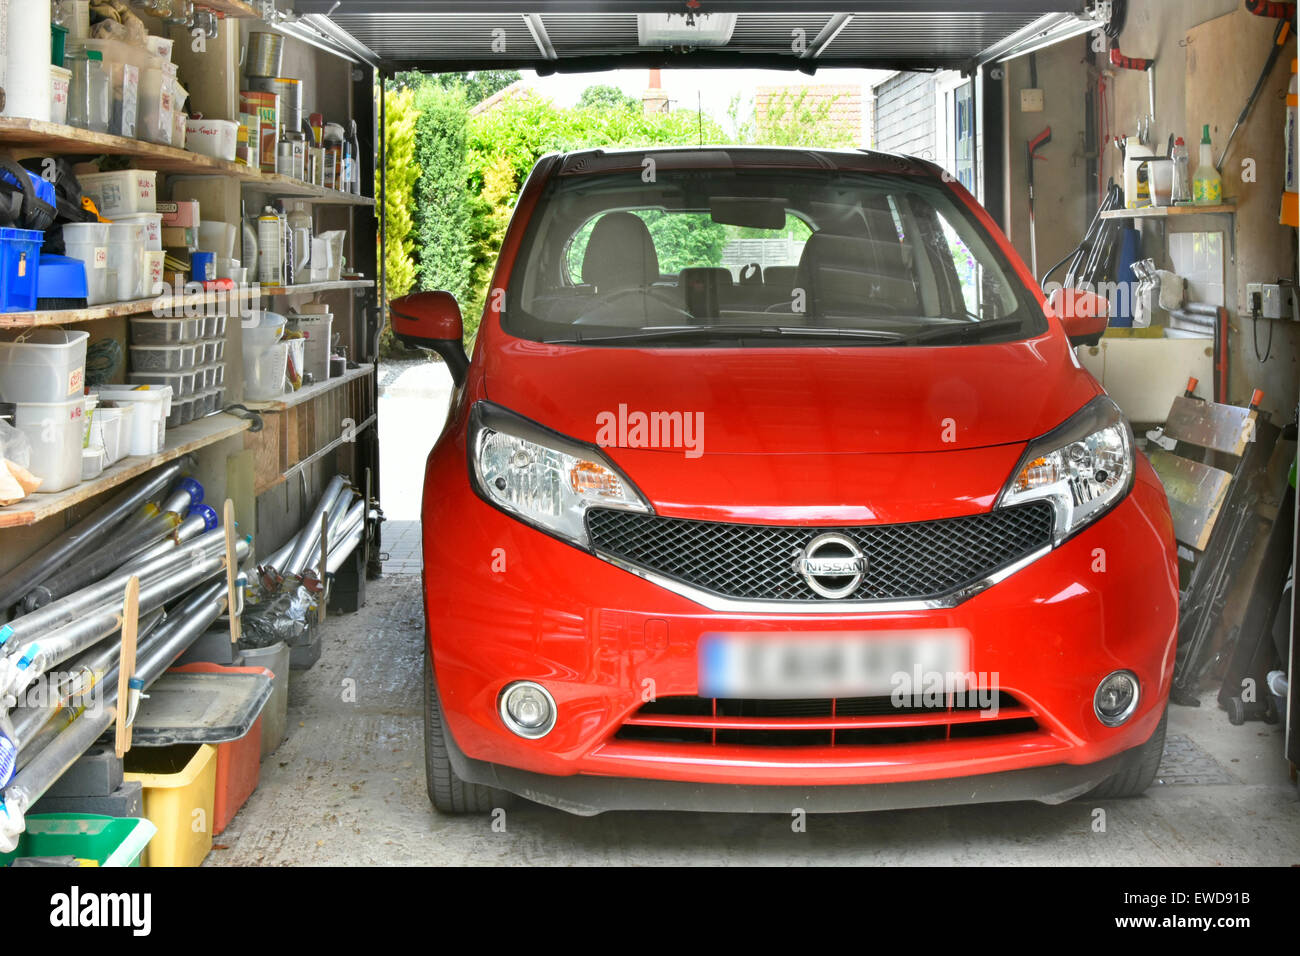 Vehicle in garage attached to residential property red Nissan car parked shelving storage of sundry household paraphernalia & tools Essex England UK Stock Photo